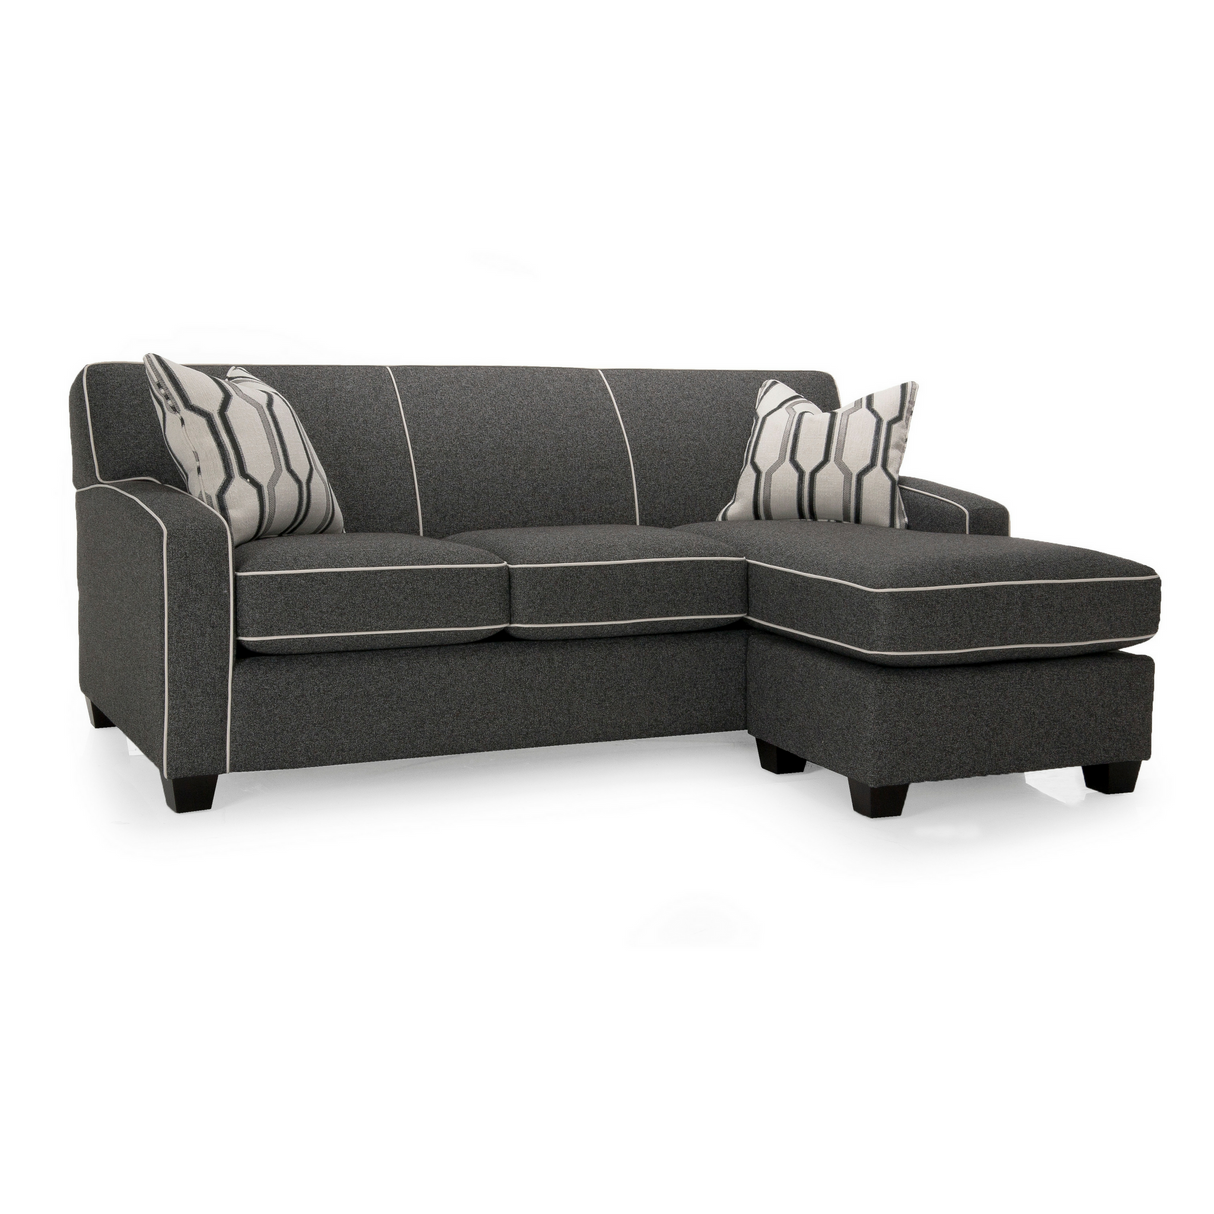 NATHAN SOFA WITH CHAISE